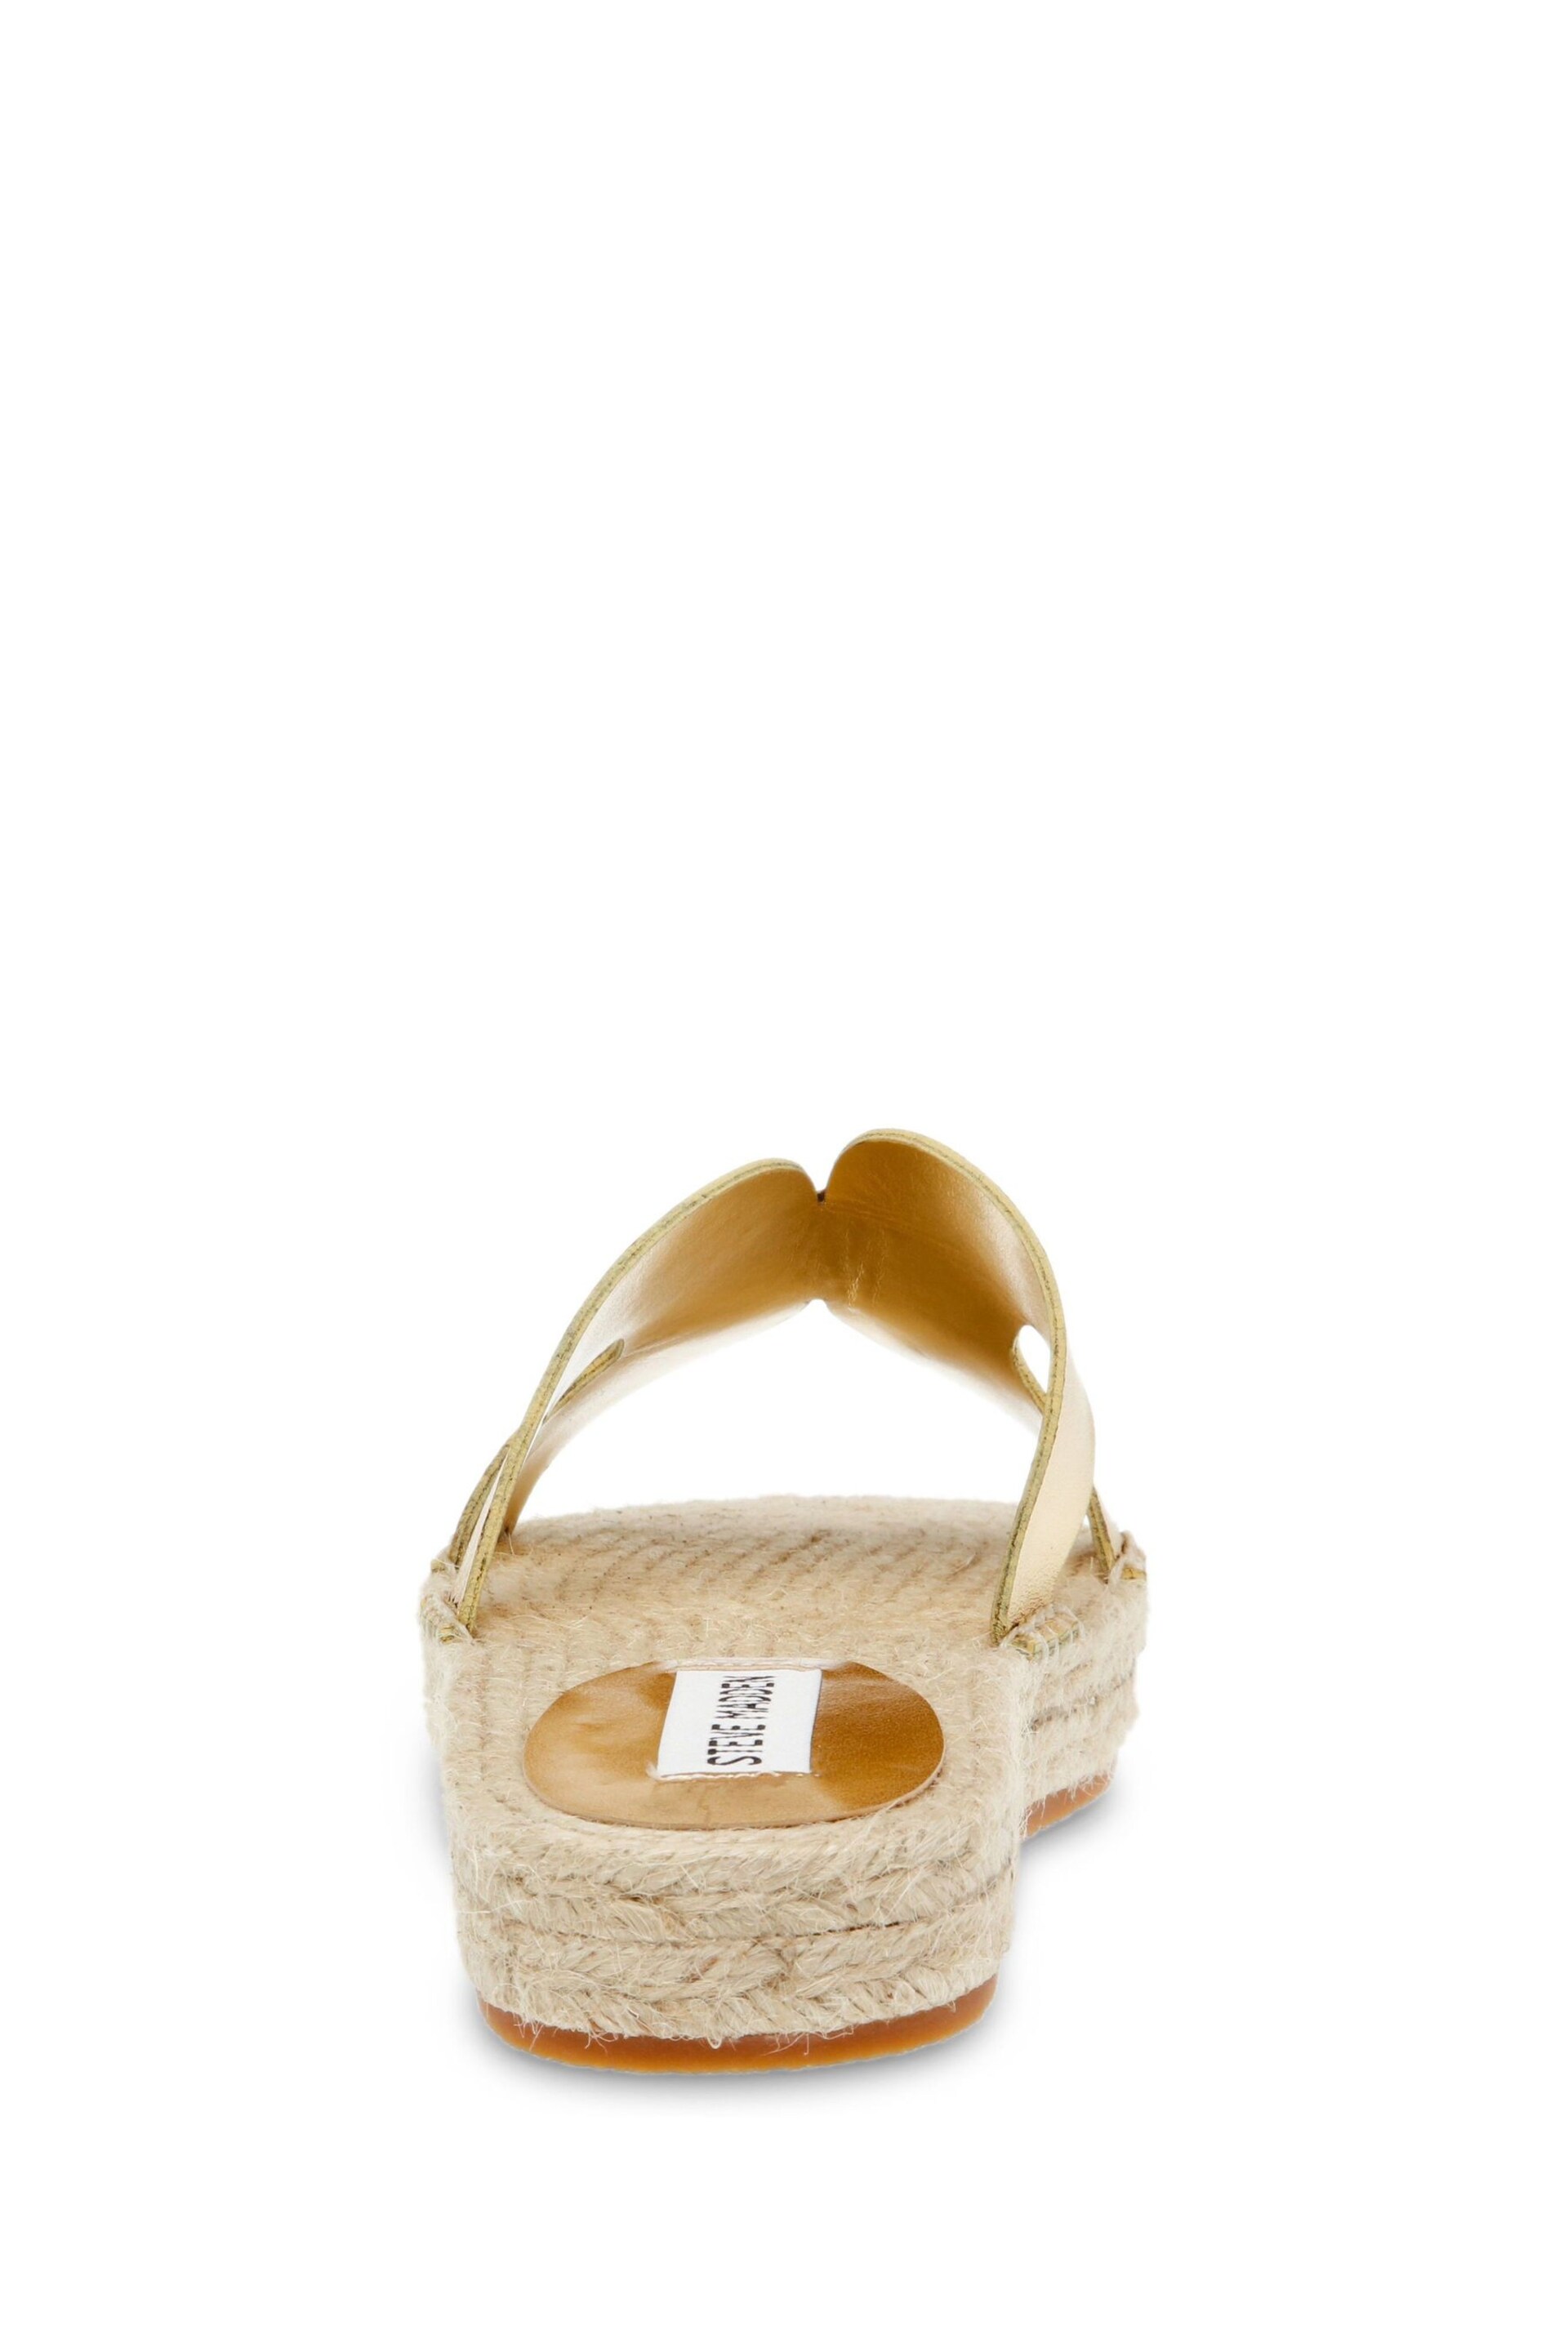 Steve Madden Gold Cheer up Sandals - Image 5 of 6